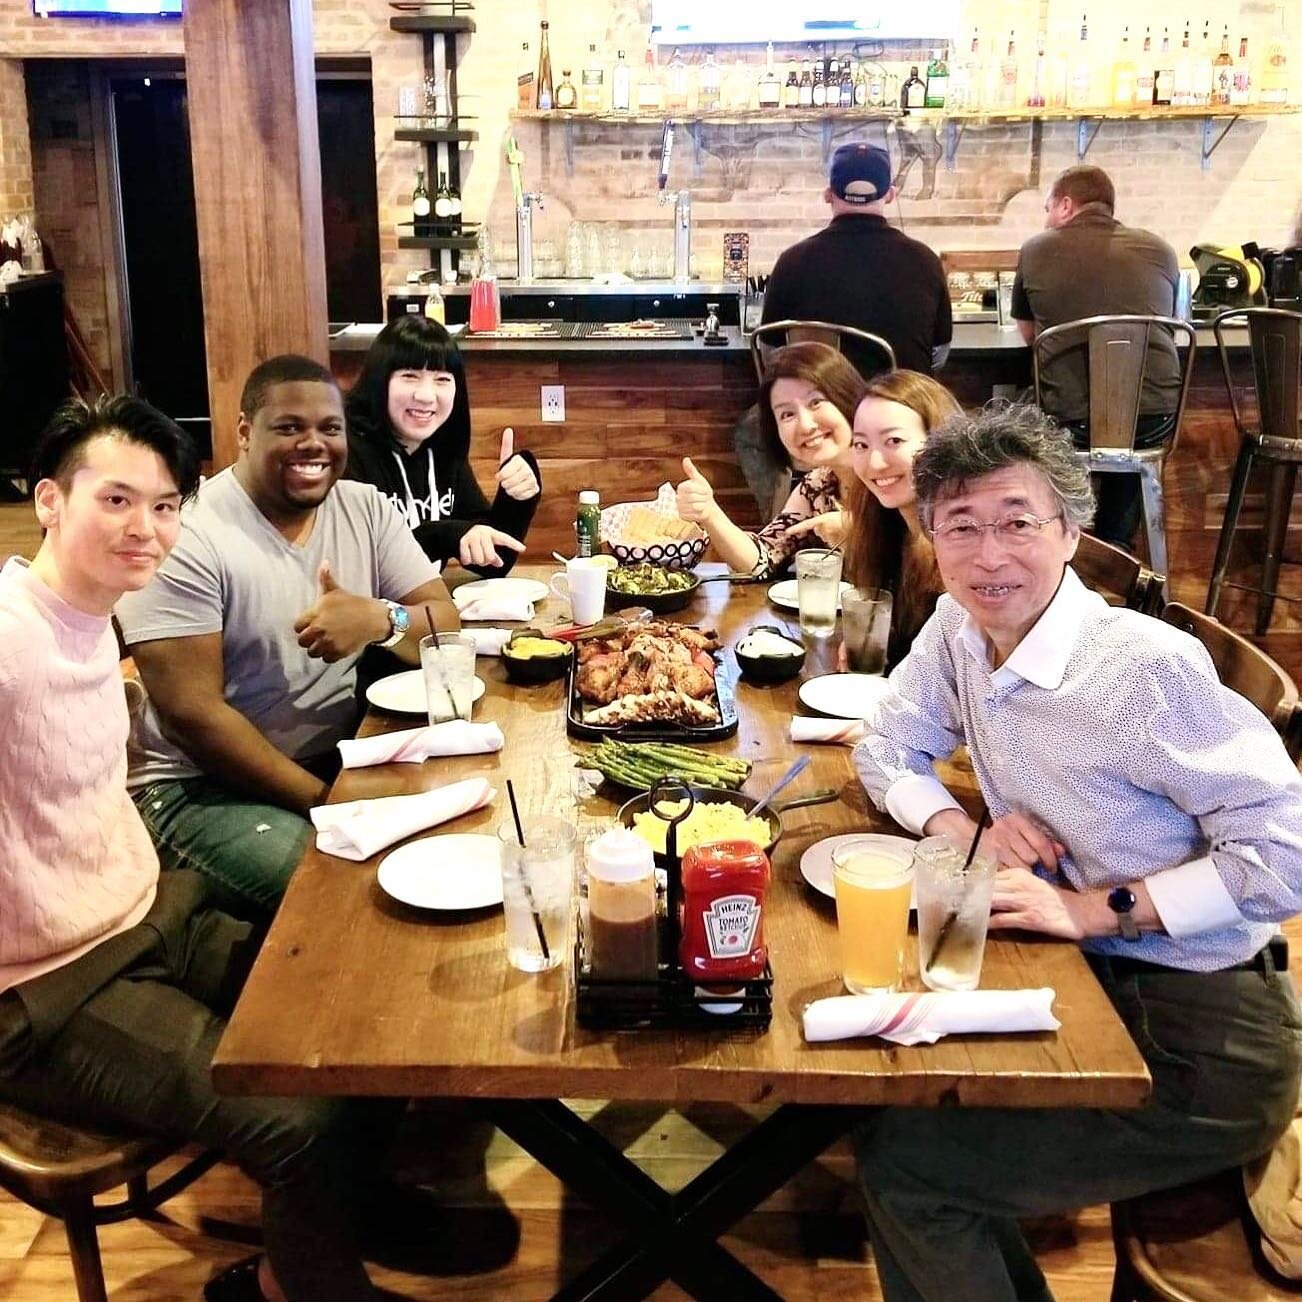 Good times yesterday treating some good friends to Texas BBQ. I can&rsquo;t wait to go to Japan someday soon to try some authentic Japanese cuisine! 🙂😋 #texas #foodie #friends